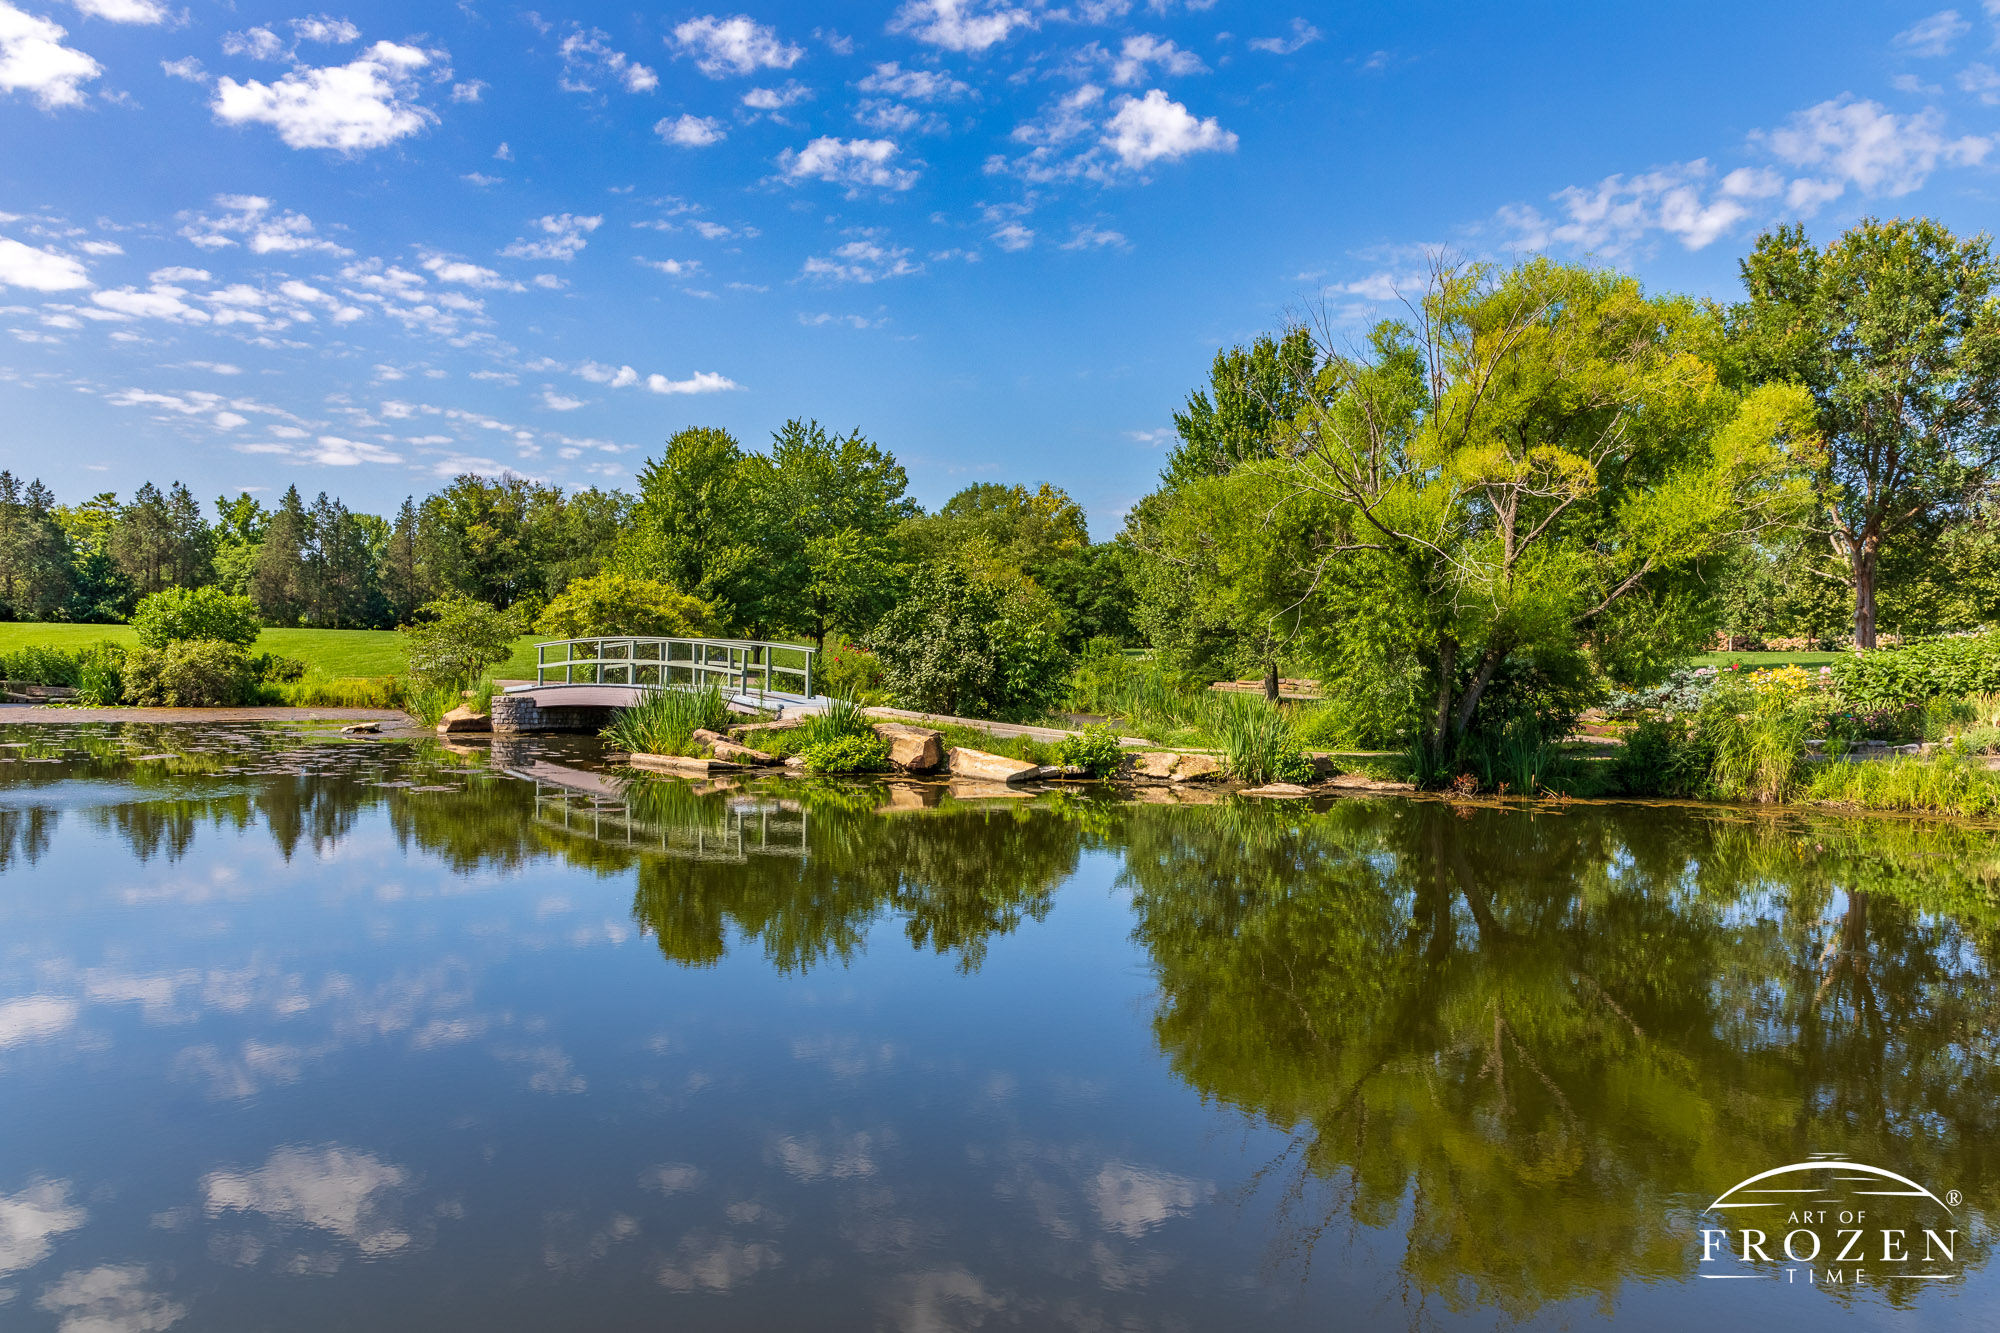 The Money Bridge and surround gardens reflected by the smooth waters of the Cox Arboretum Pond on a pretty day